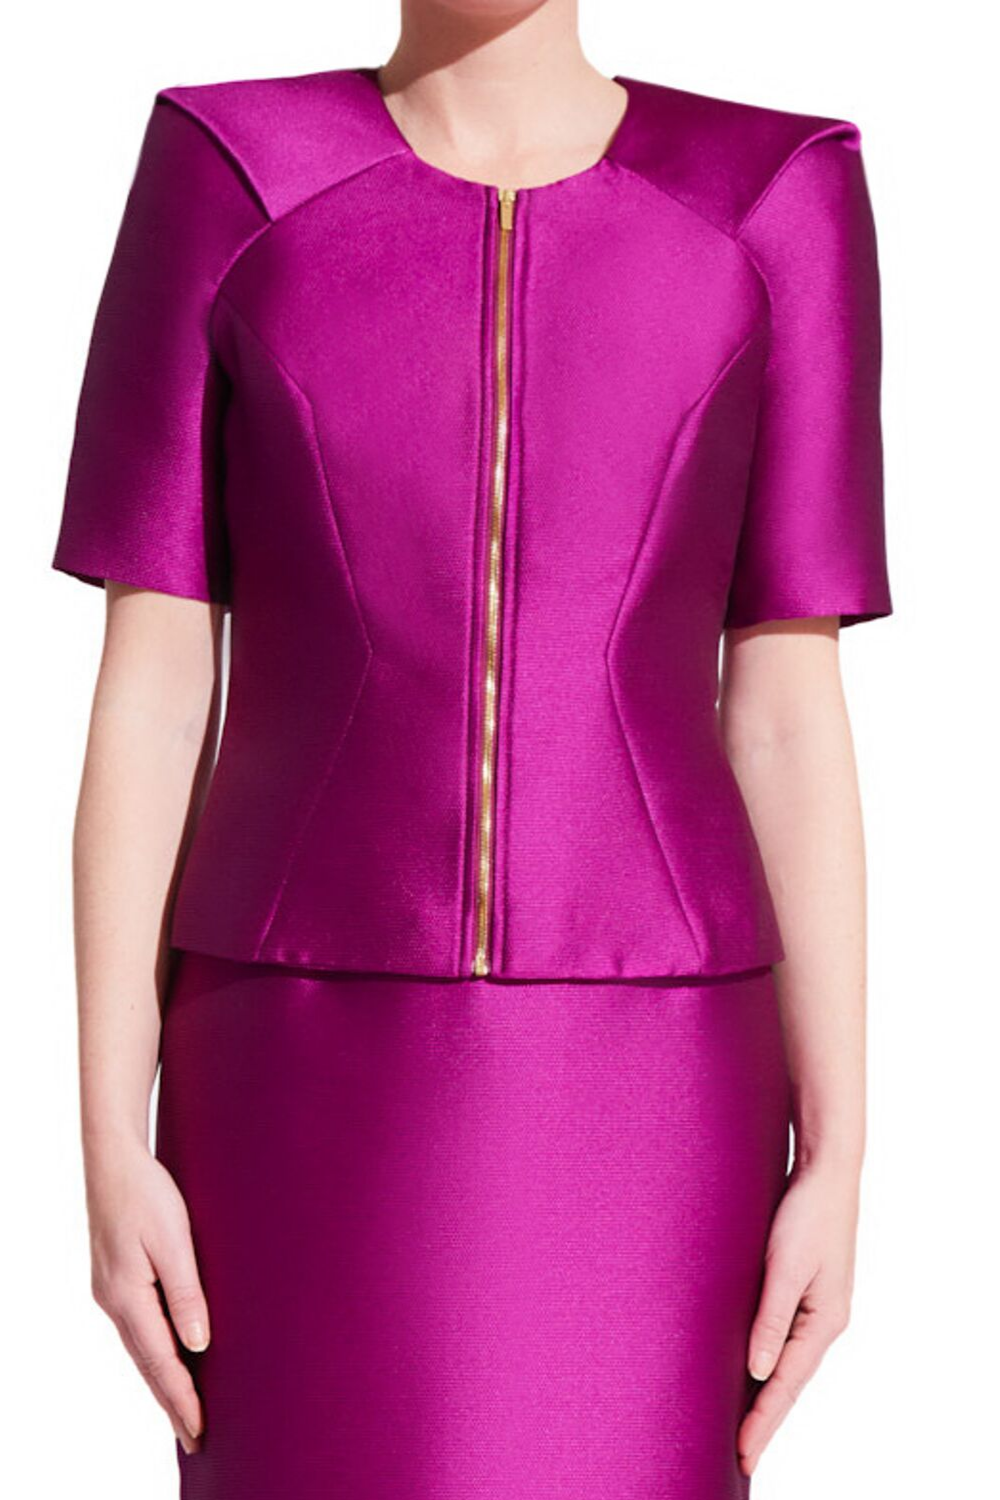 Women's raspberry purple formal jacket with padded shoulders, elbow length sleeves and centered golden zipper